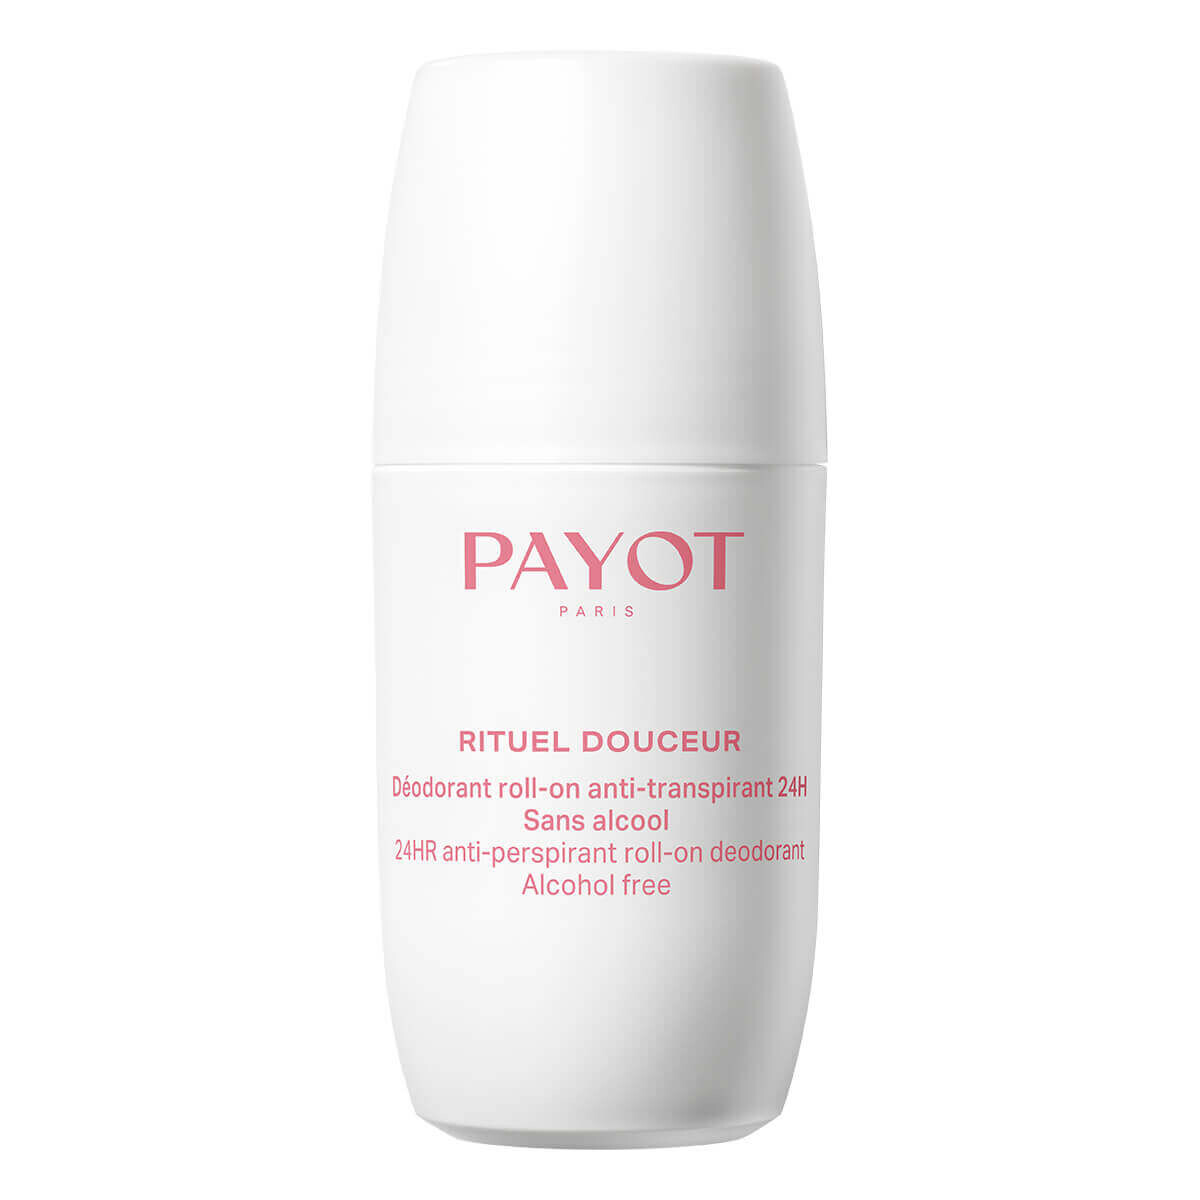 Payot 24hr Anti-perspirant Roll-On Deodorant, Alcohol free, 75 ml.